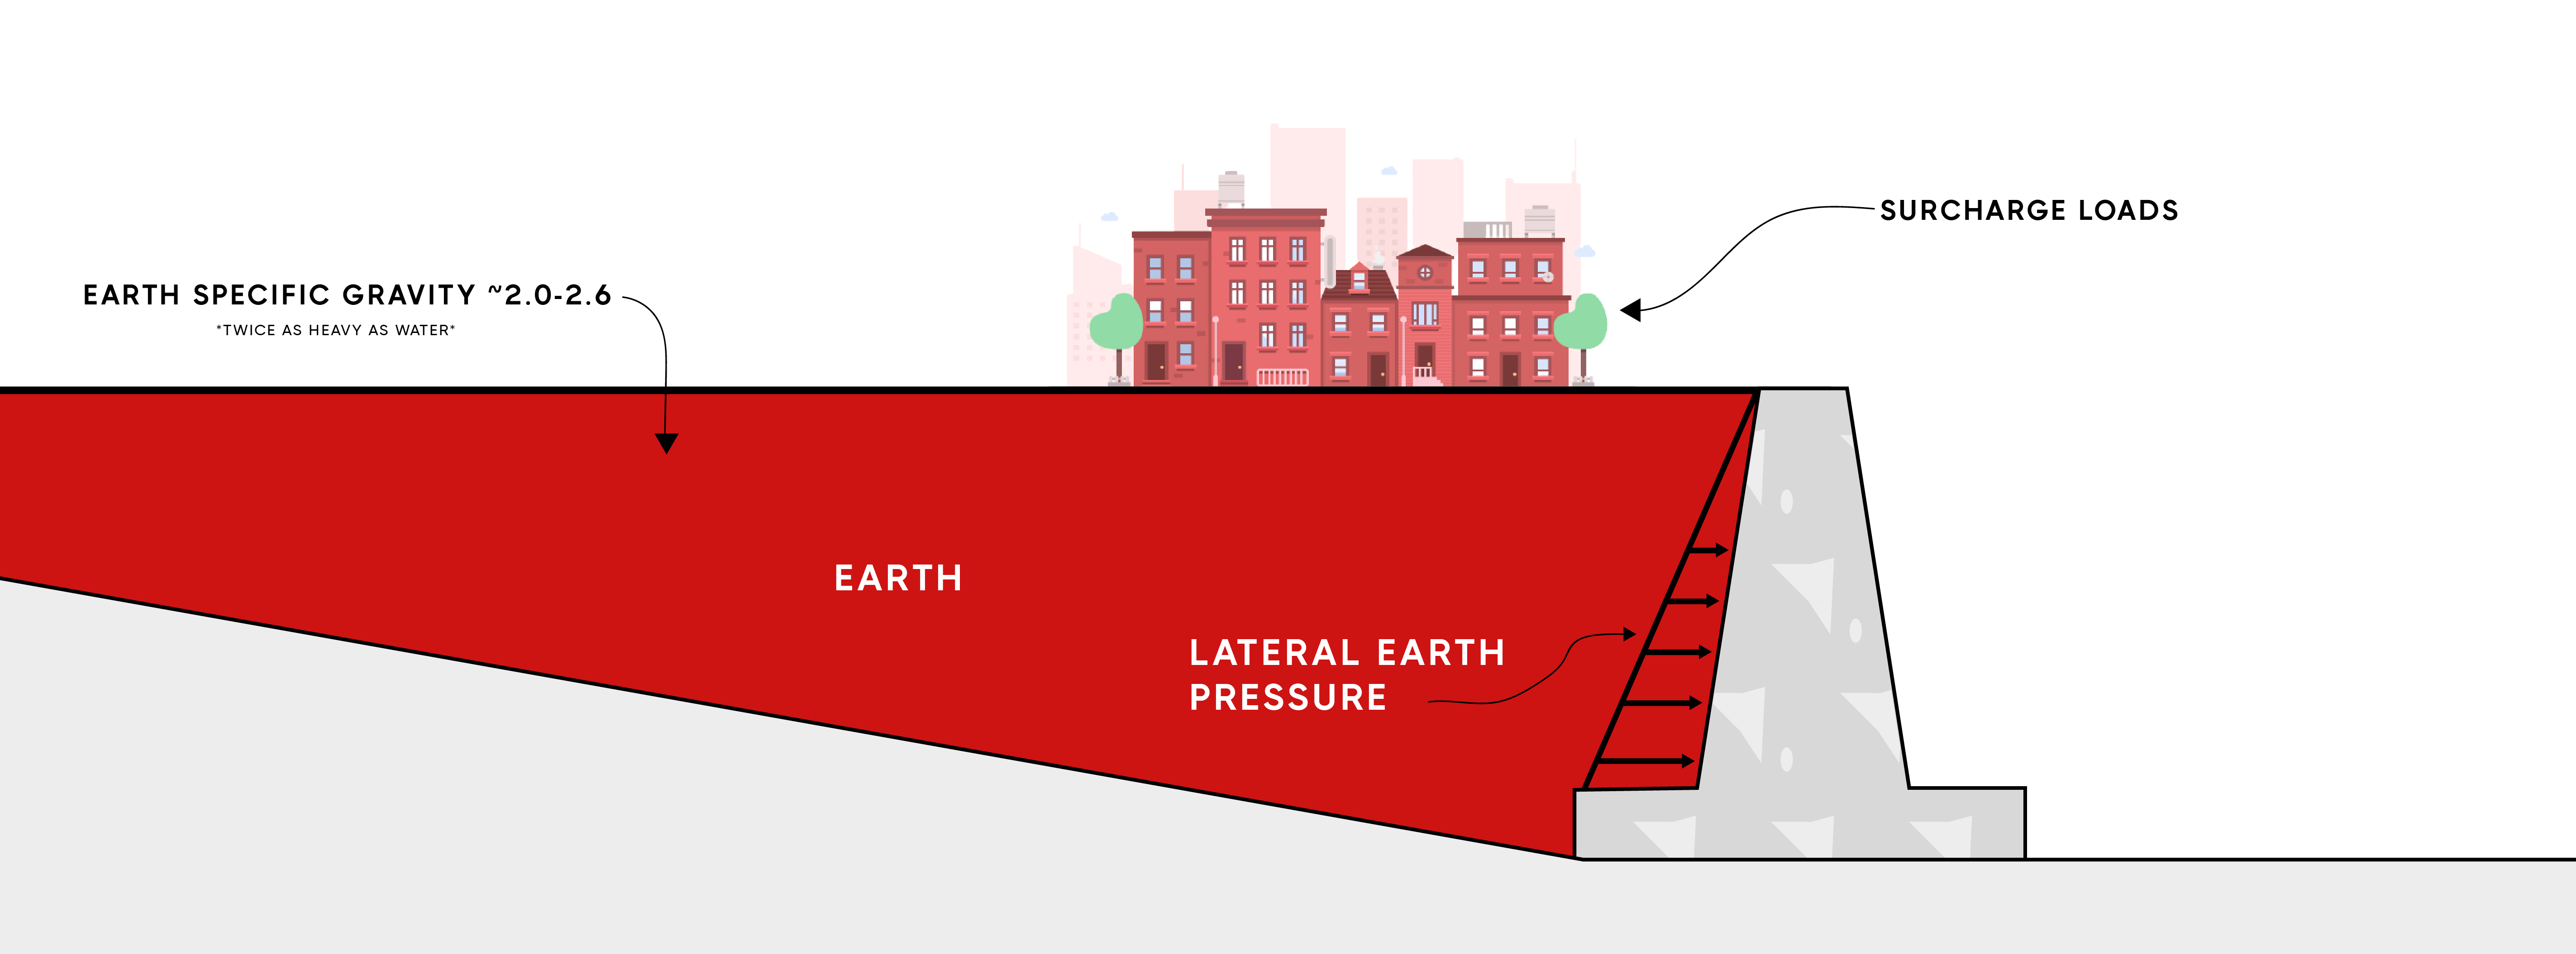 Retaining Wall infographic with lateral earth pressure and surcahrge loads